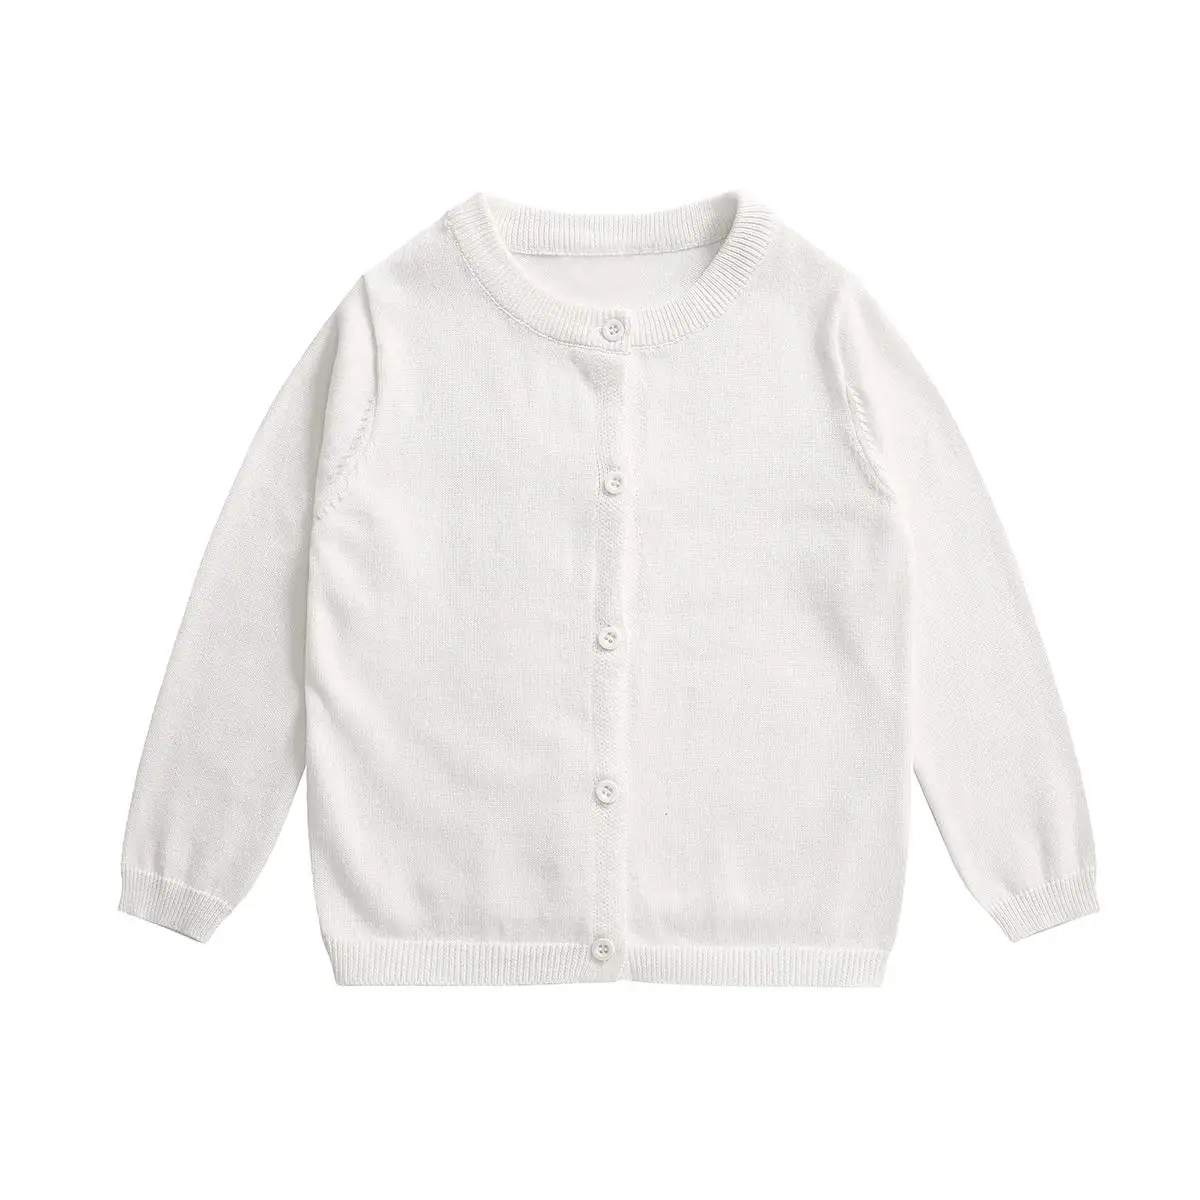 Girl Long Sleeve Cardigan Sweater Toddler Boys Knitted School Uniforms Button Down Solid Knit Cardigans